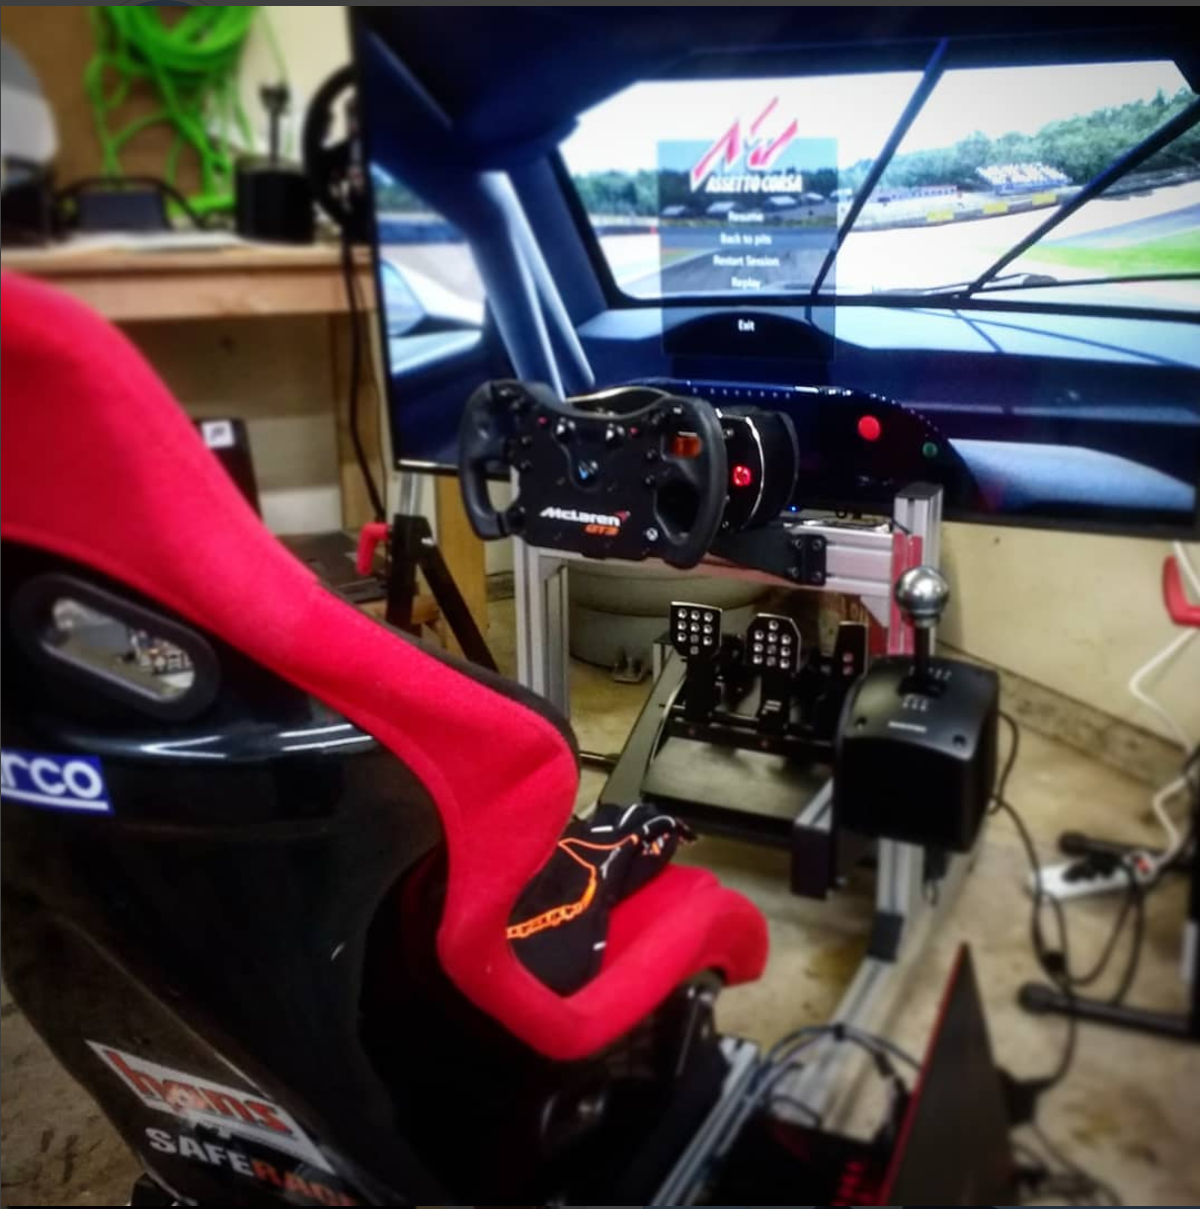 fanatec – Racer on Rails: High Performance Track and Race Car Shop and Race  Team based in Renton, WA